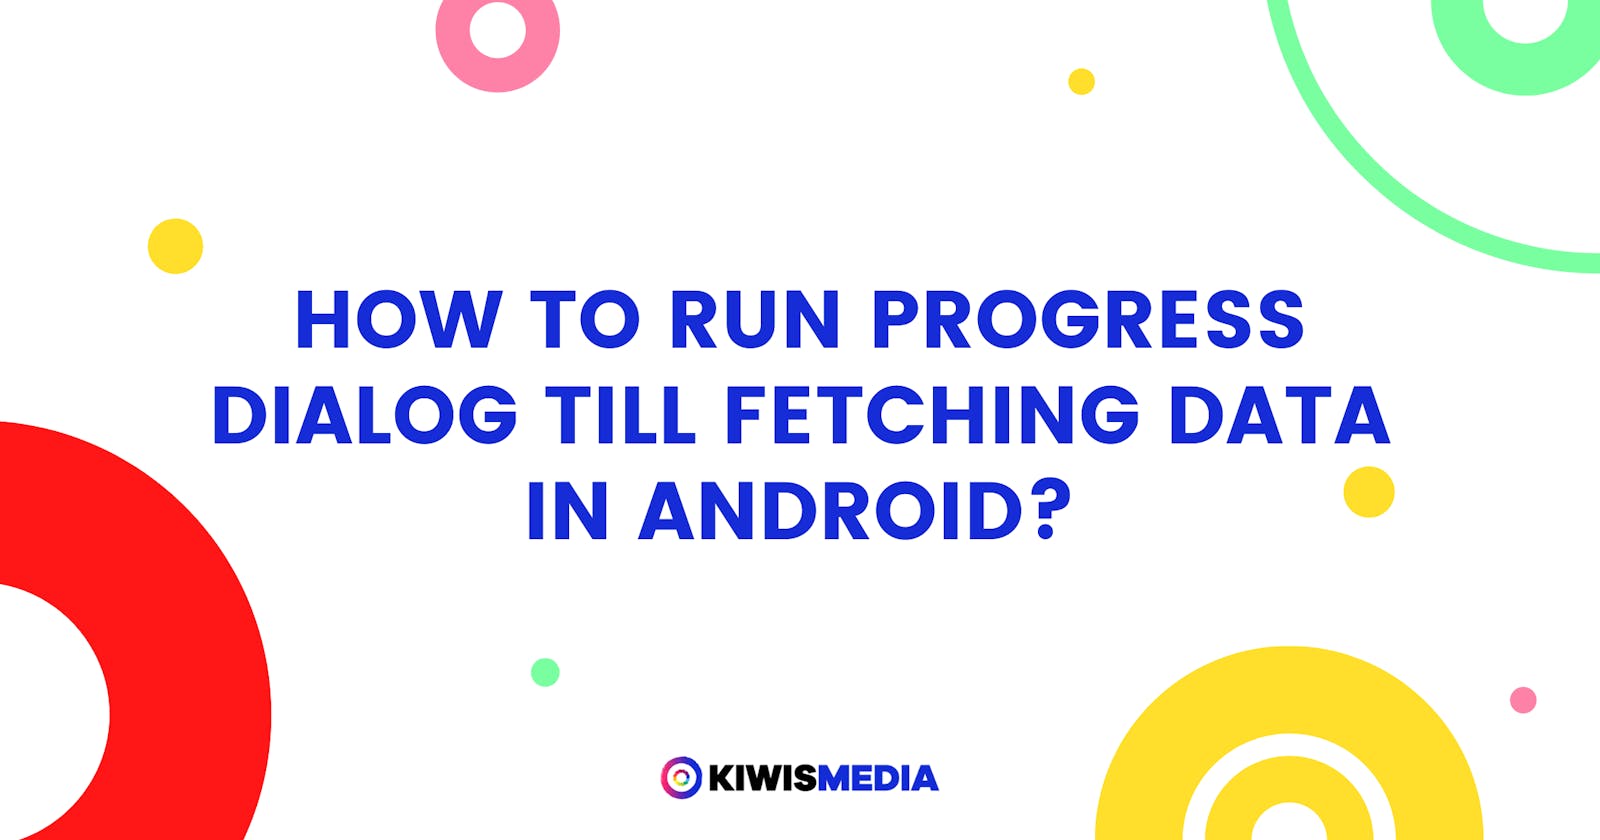 How to run progress dialog till fetching data in Android?